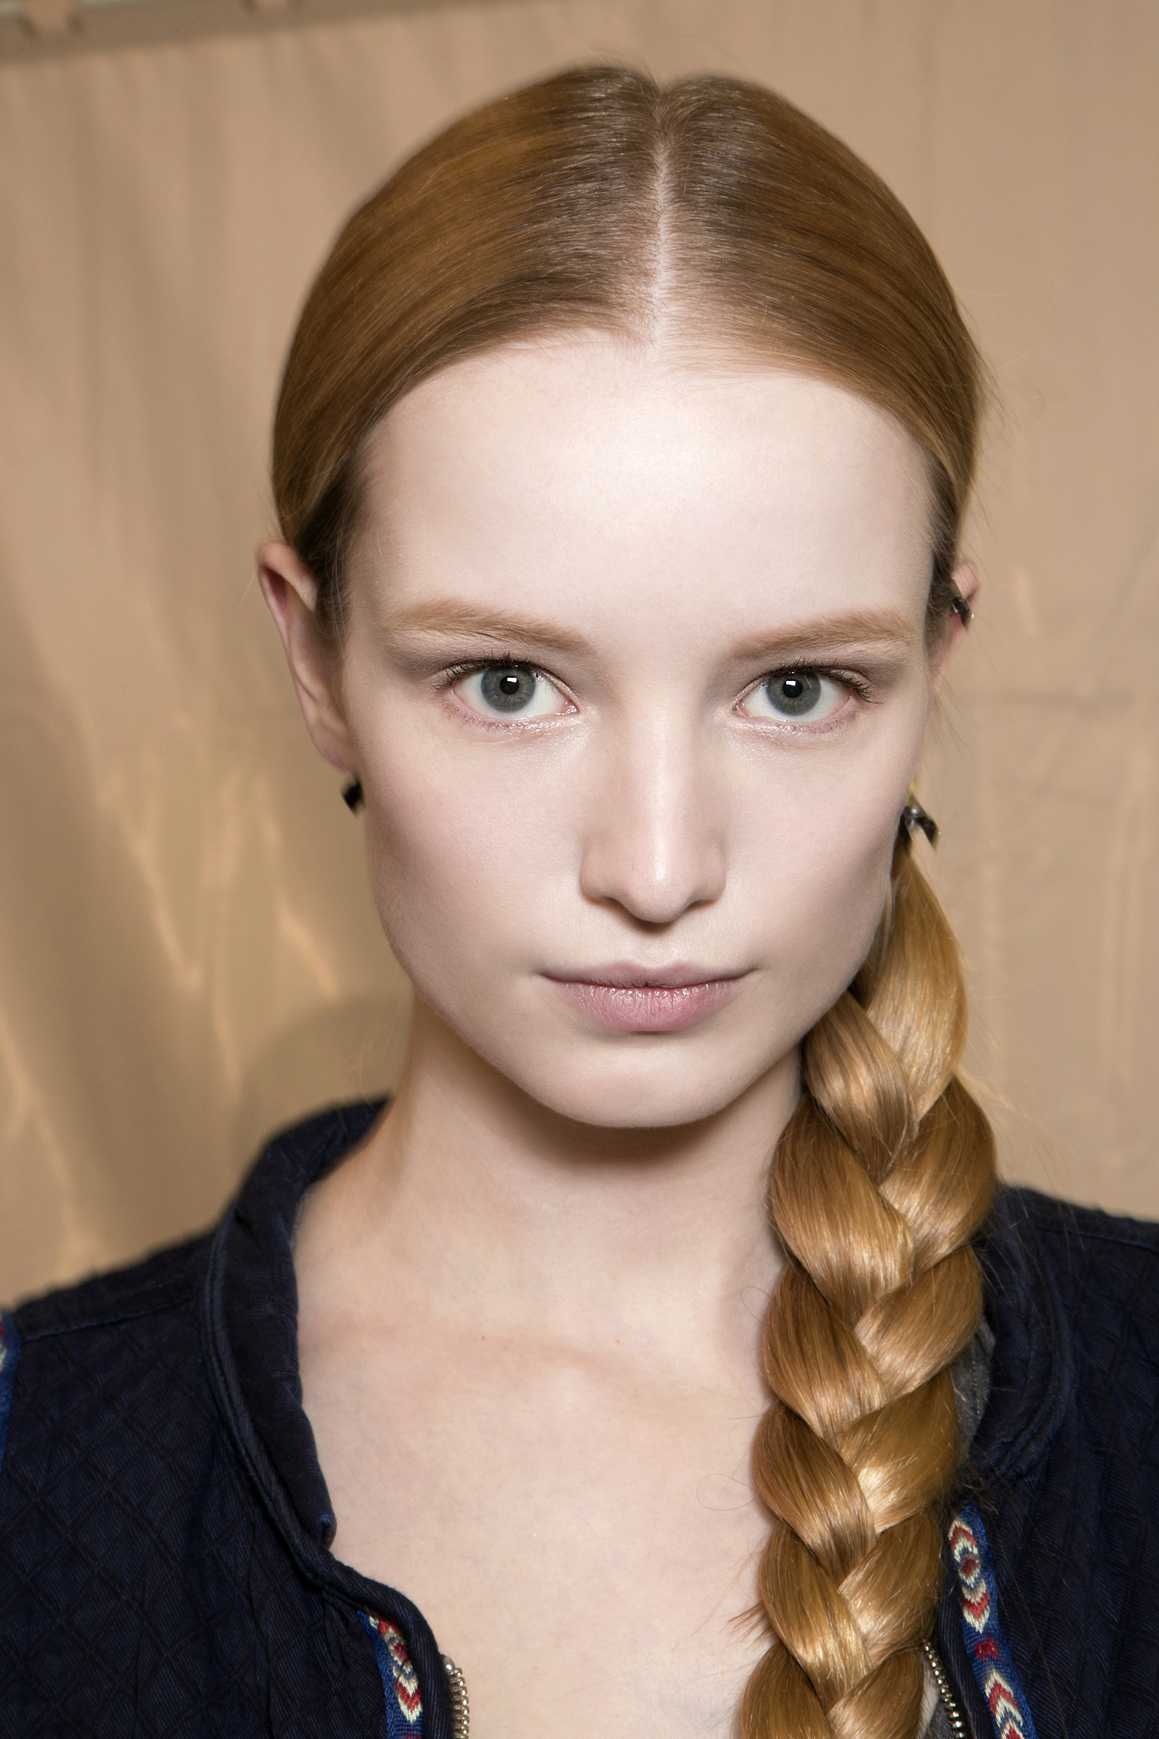 How to Braid Hair: 7 Reasons Your Braid Isn't Coming Out Great | StyleCaster